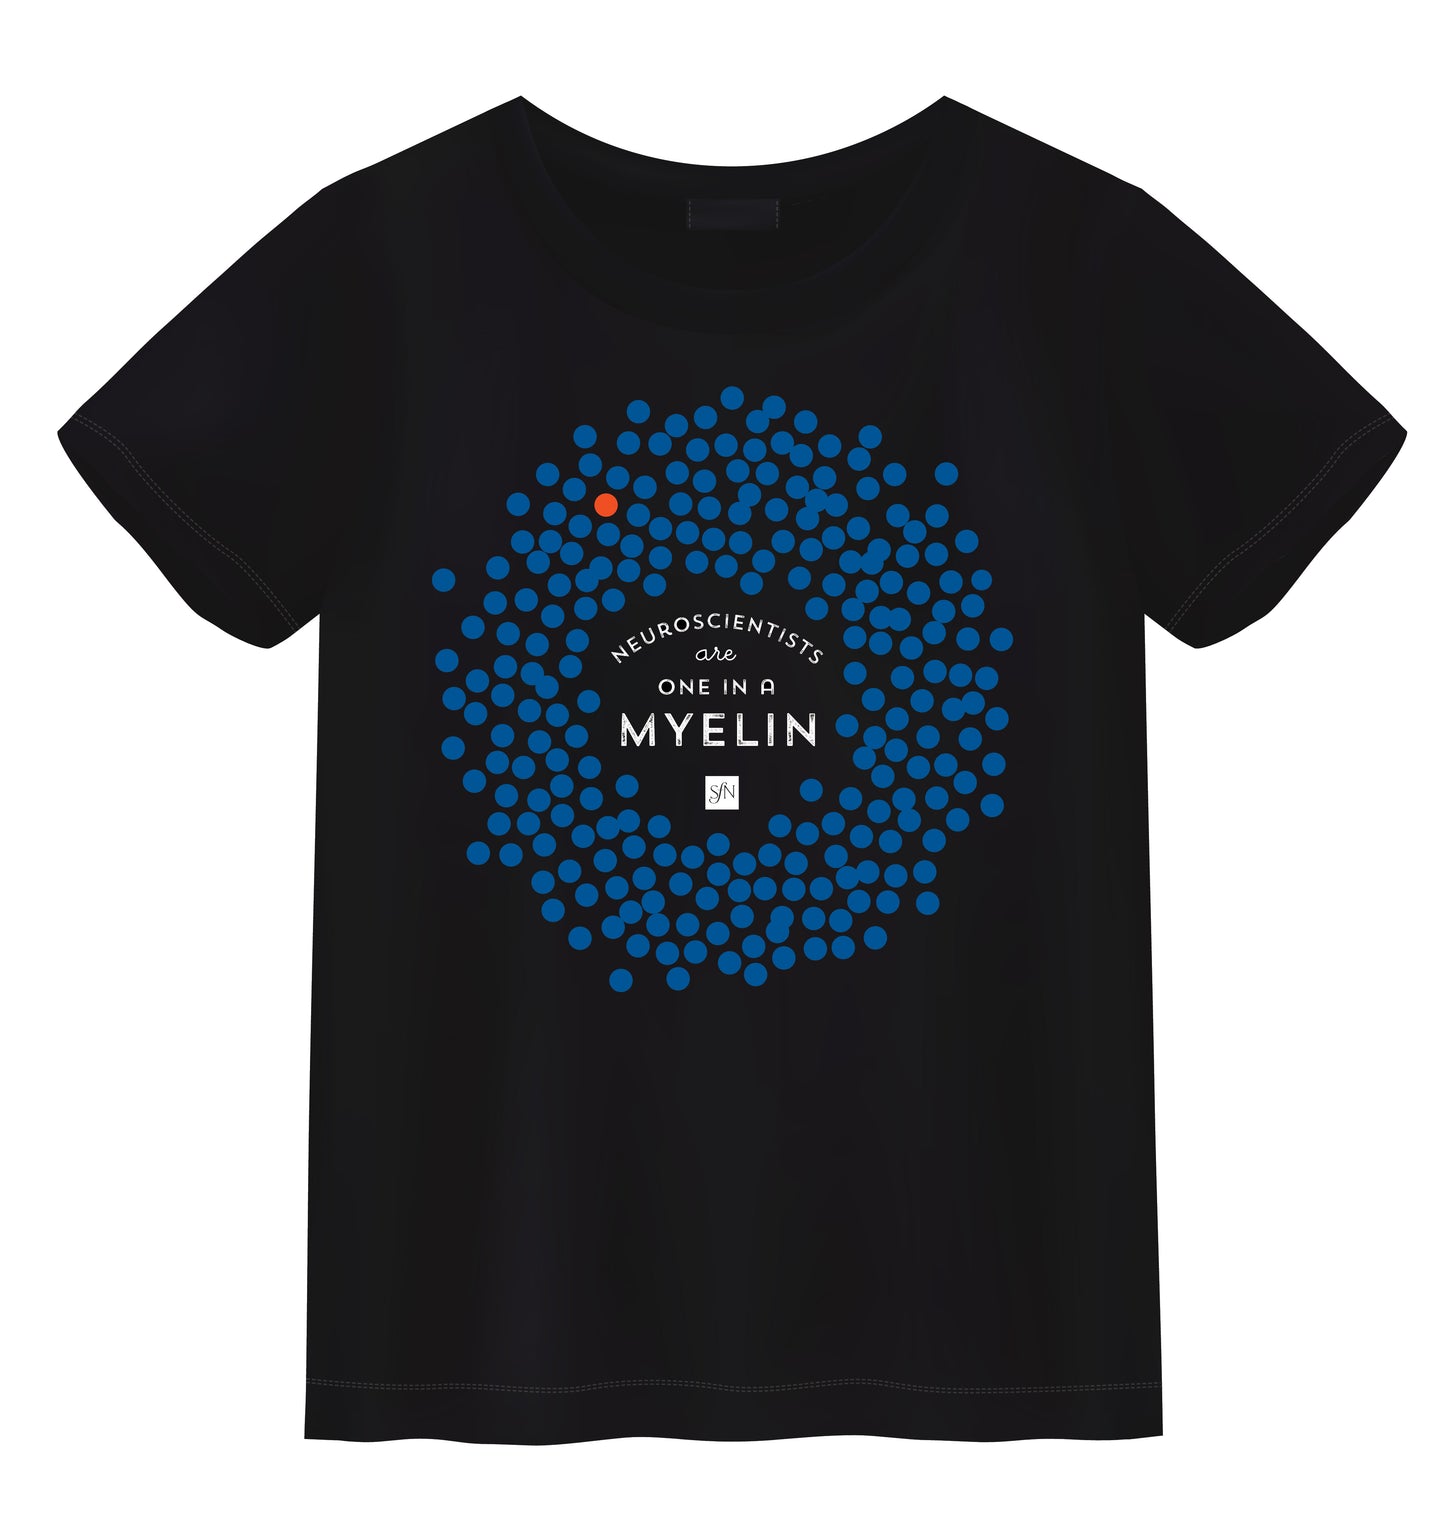 Neuroscientists are One in a Myelin T-shirt